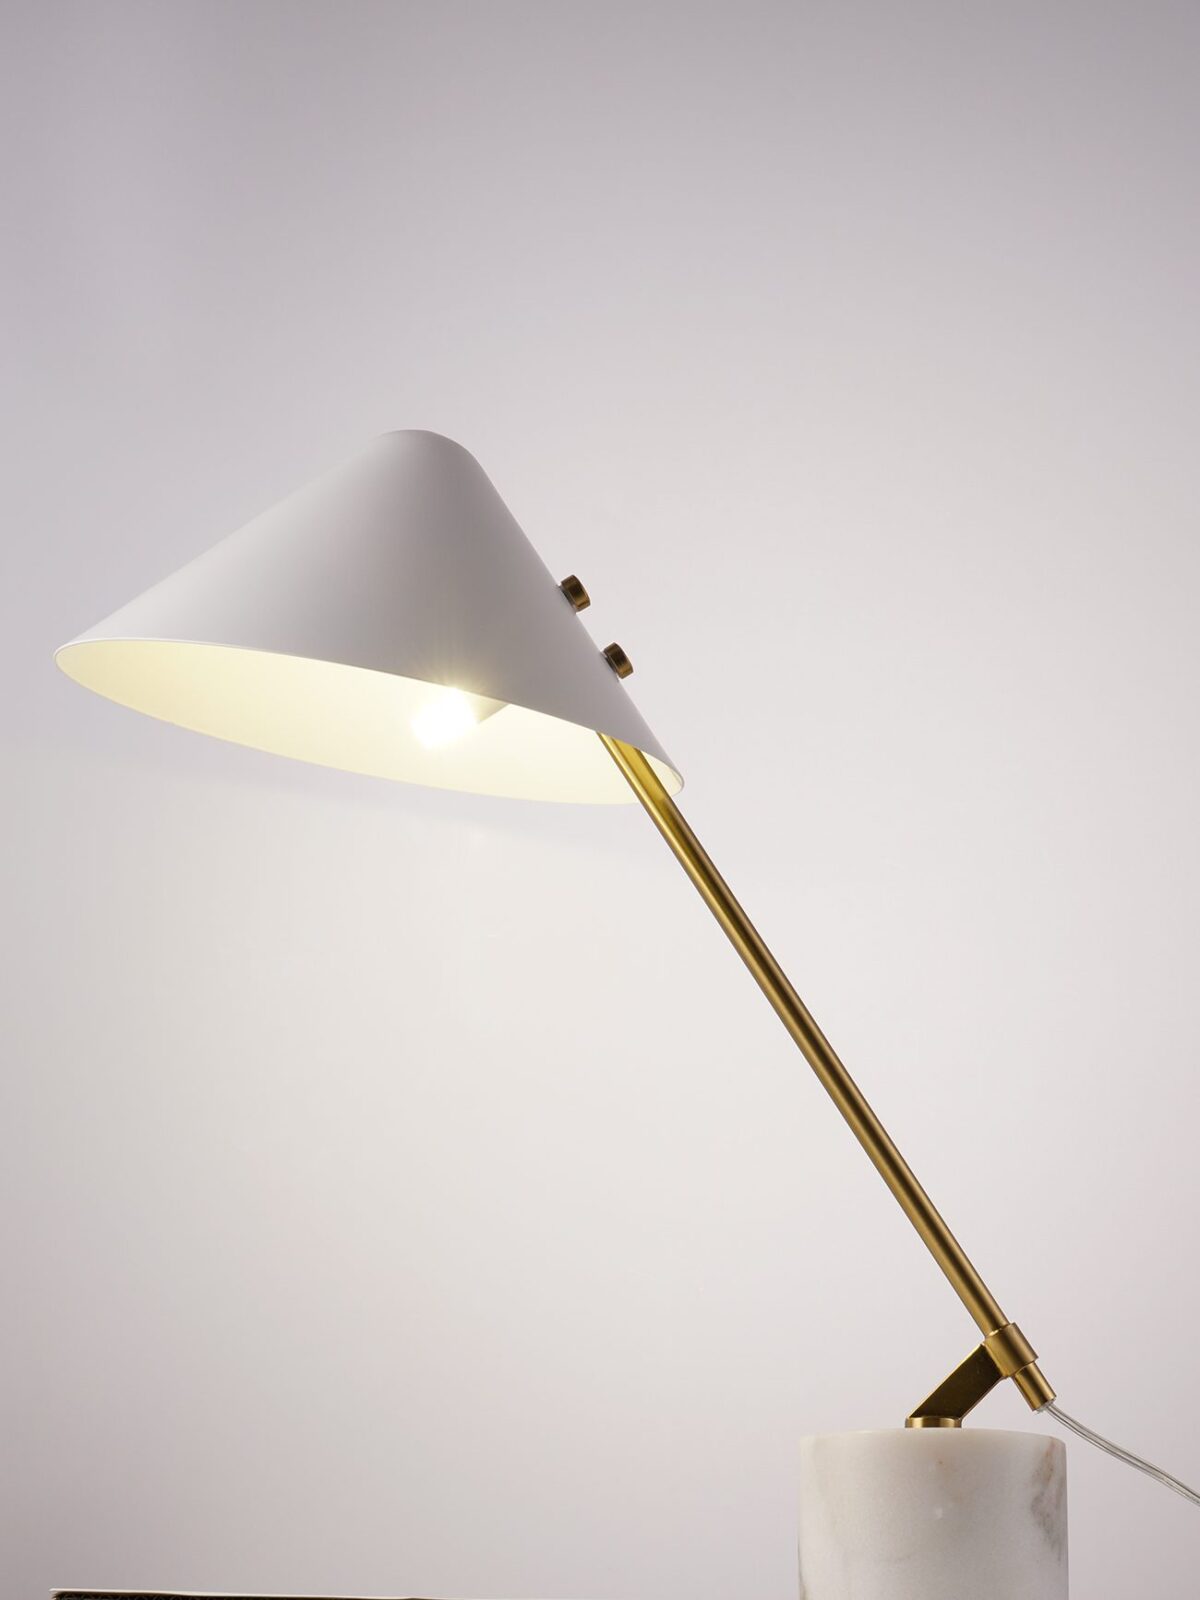 Small Hat Table - Mooielight Small Hat Table Lamp